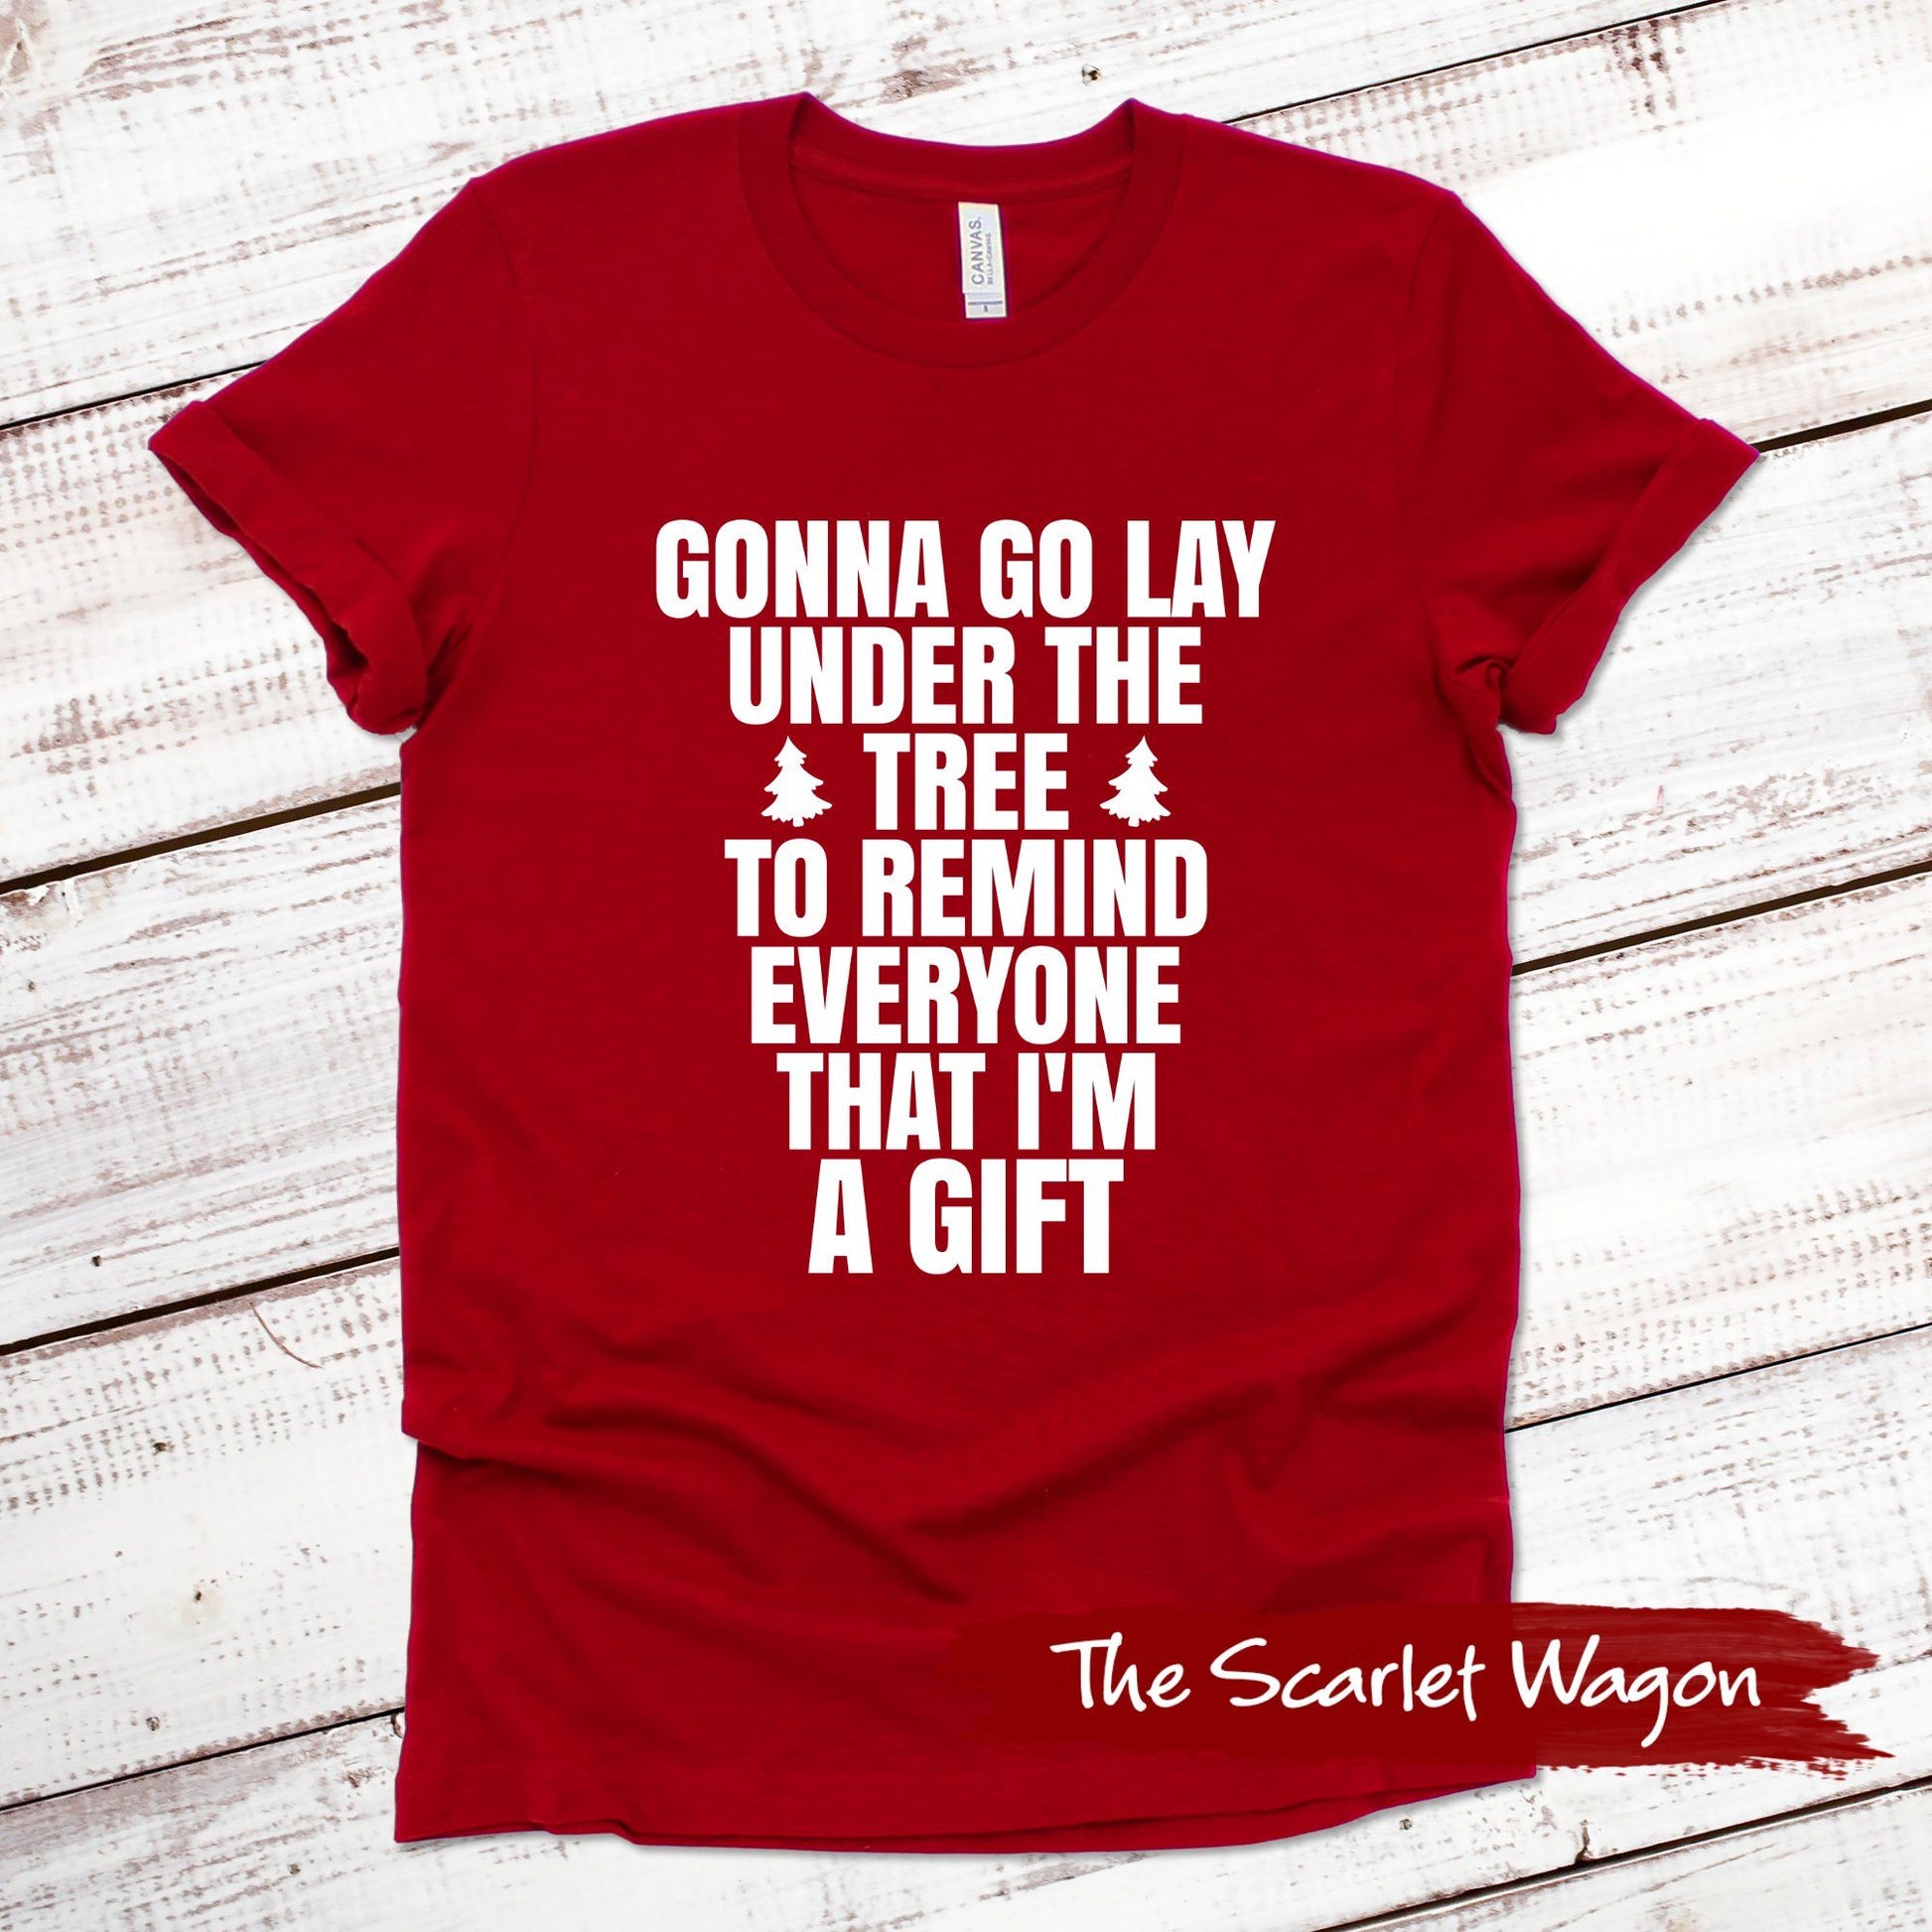 Gonna Go Lay Under the Tree Christmas Shirt Scarlet Wagon Red XS 